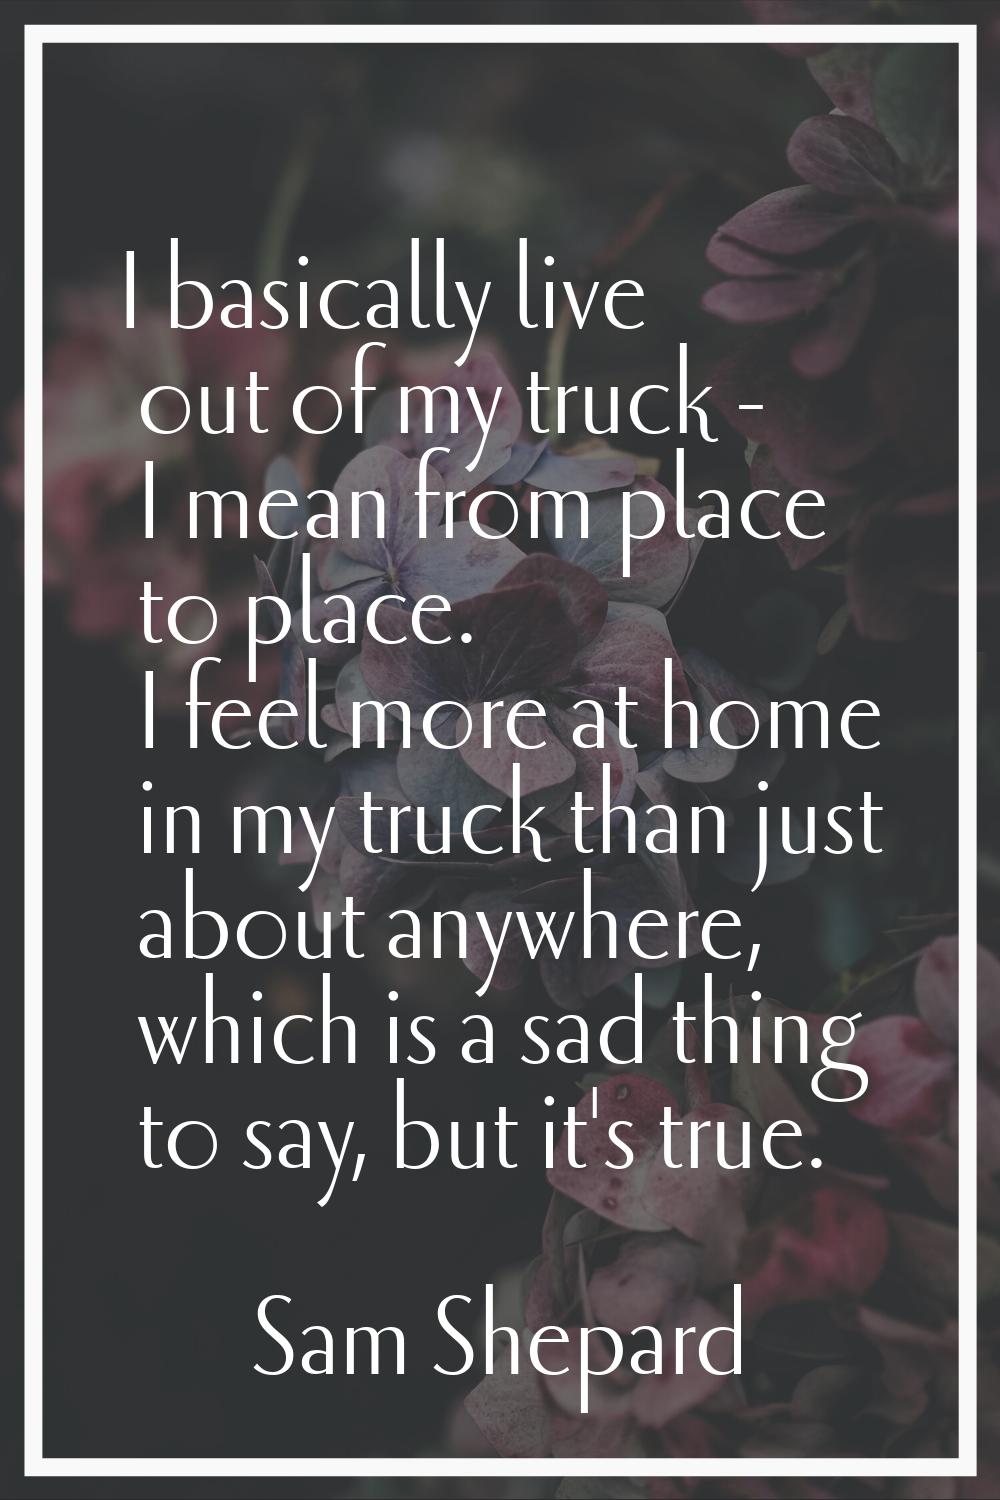 I basically live out of my truck - I mean from place to place. I feel more at home in my truck than